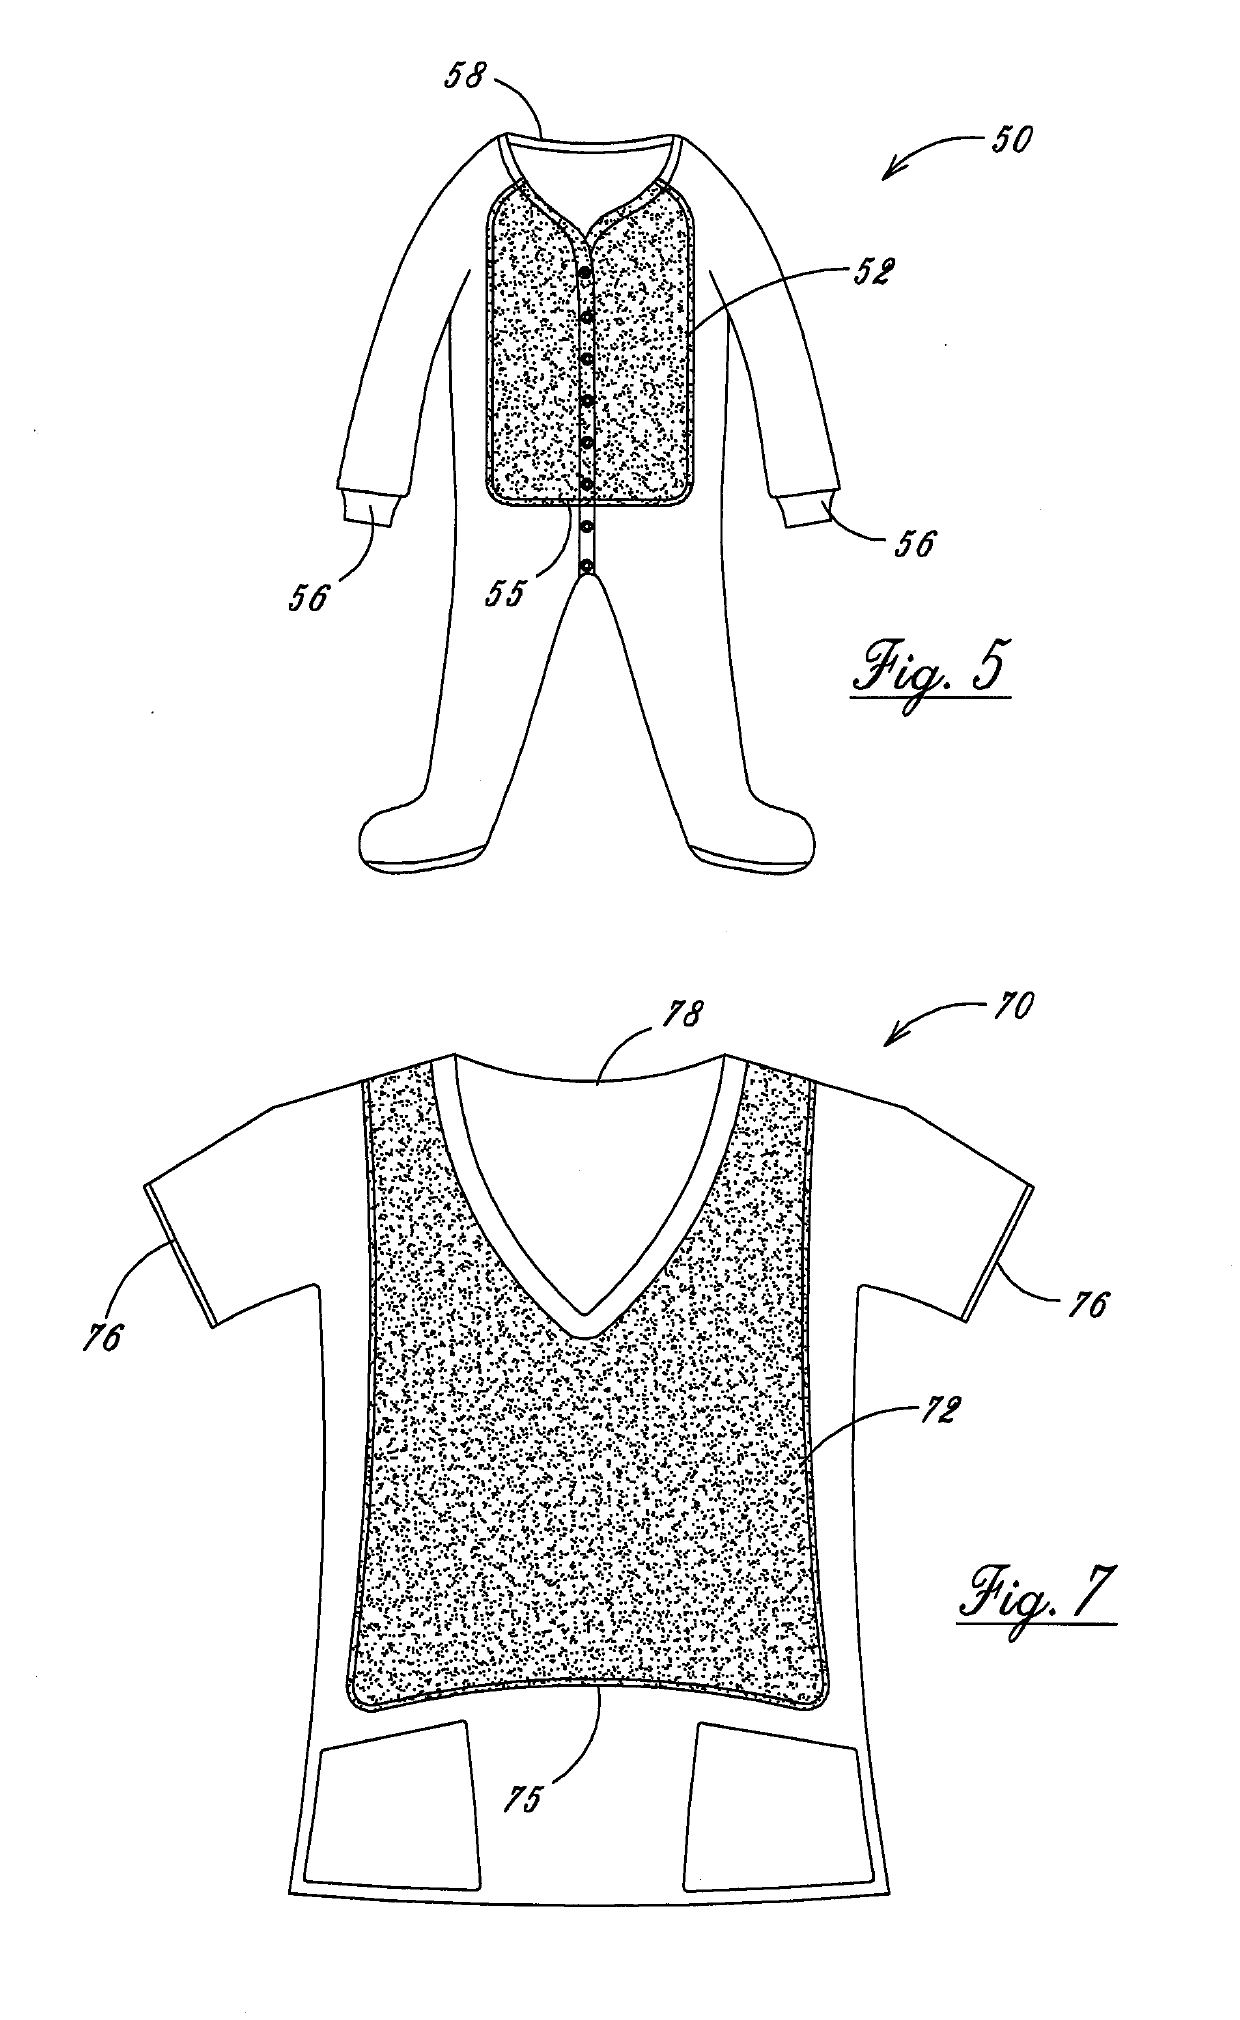 Permanently Embedded Protective Covering for Articles of Clothing